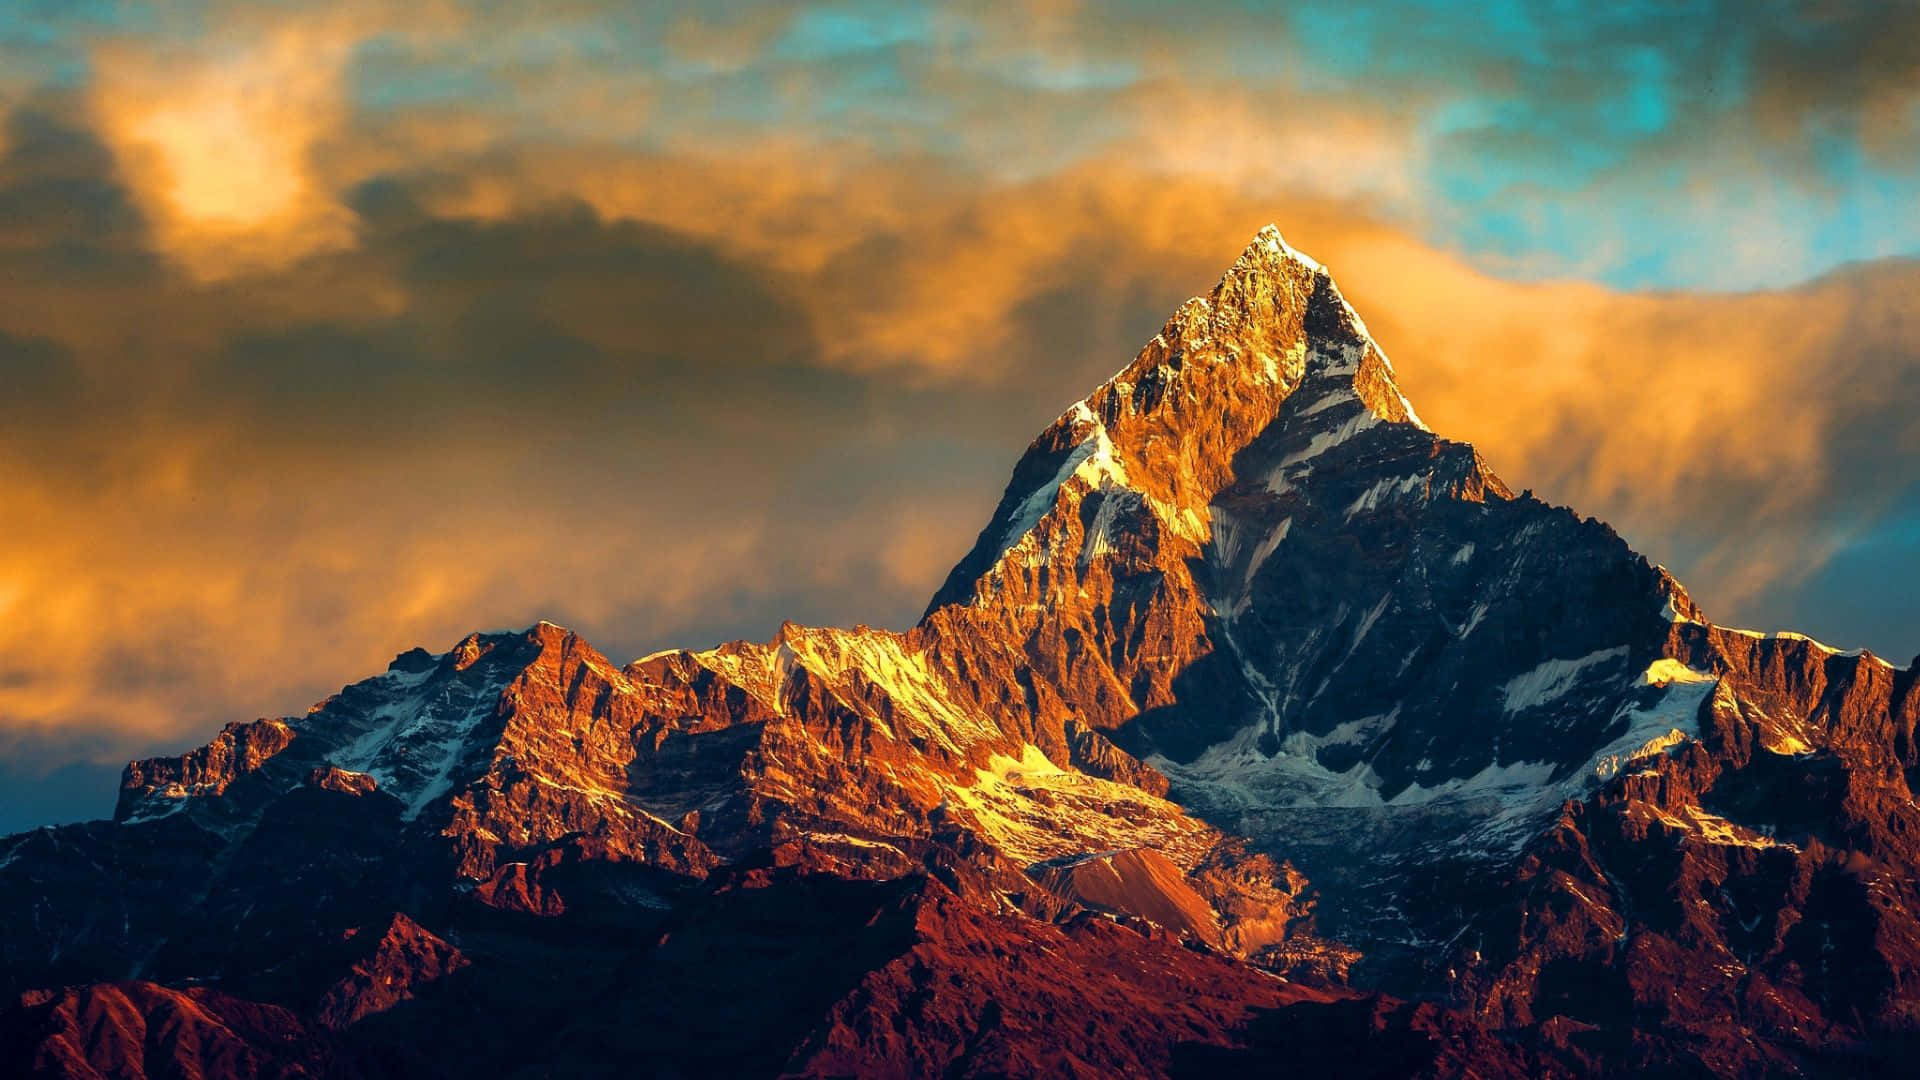 Breathtaking landscape of Mount Everest, the highest mountain in the Himalayas